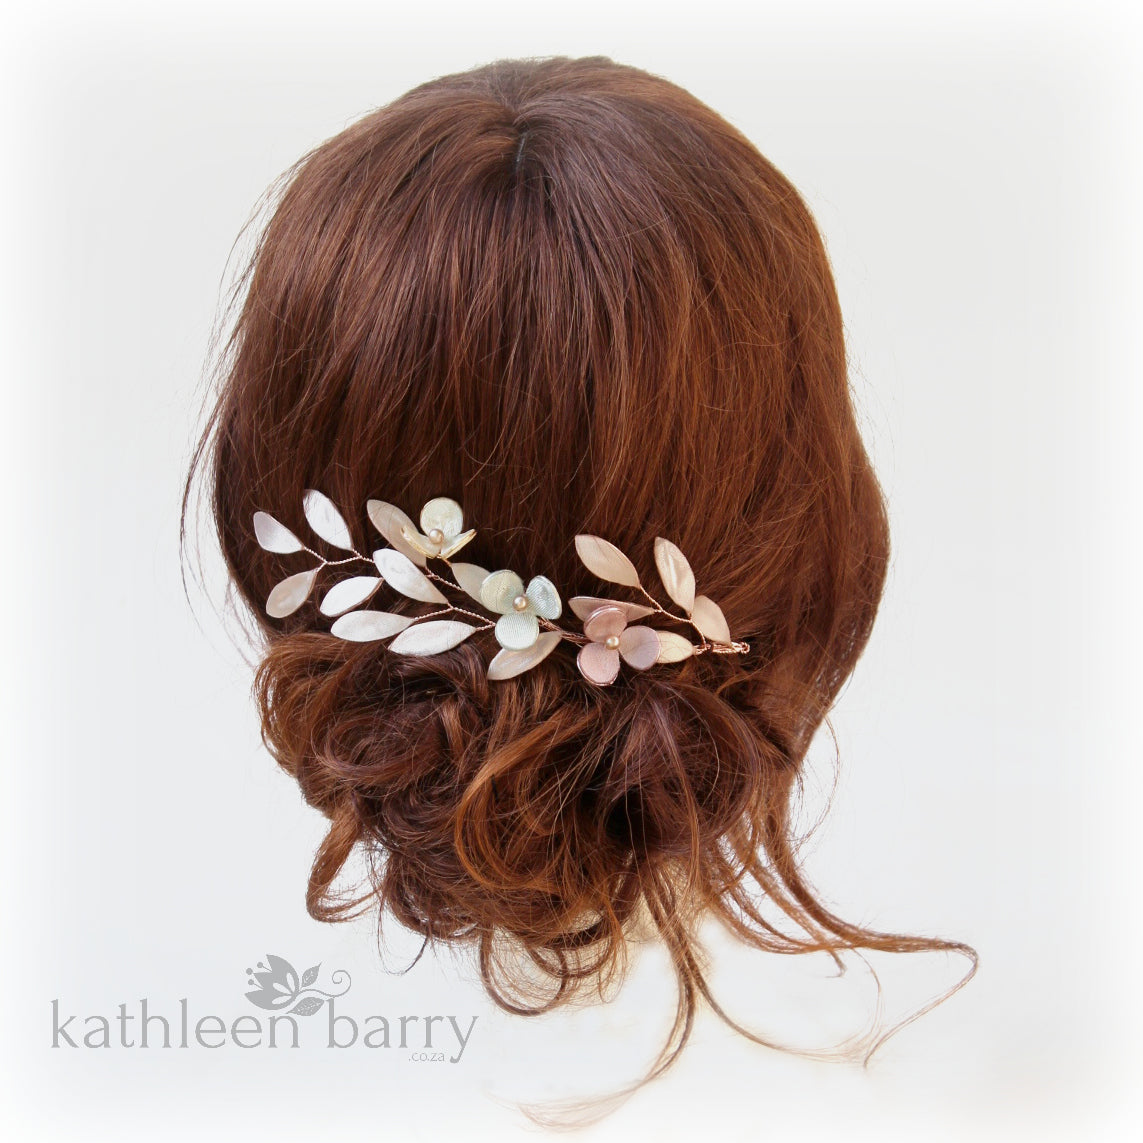 Theora leaf hairpiece - satin sculpted fabric leaves & flowers - color options available